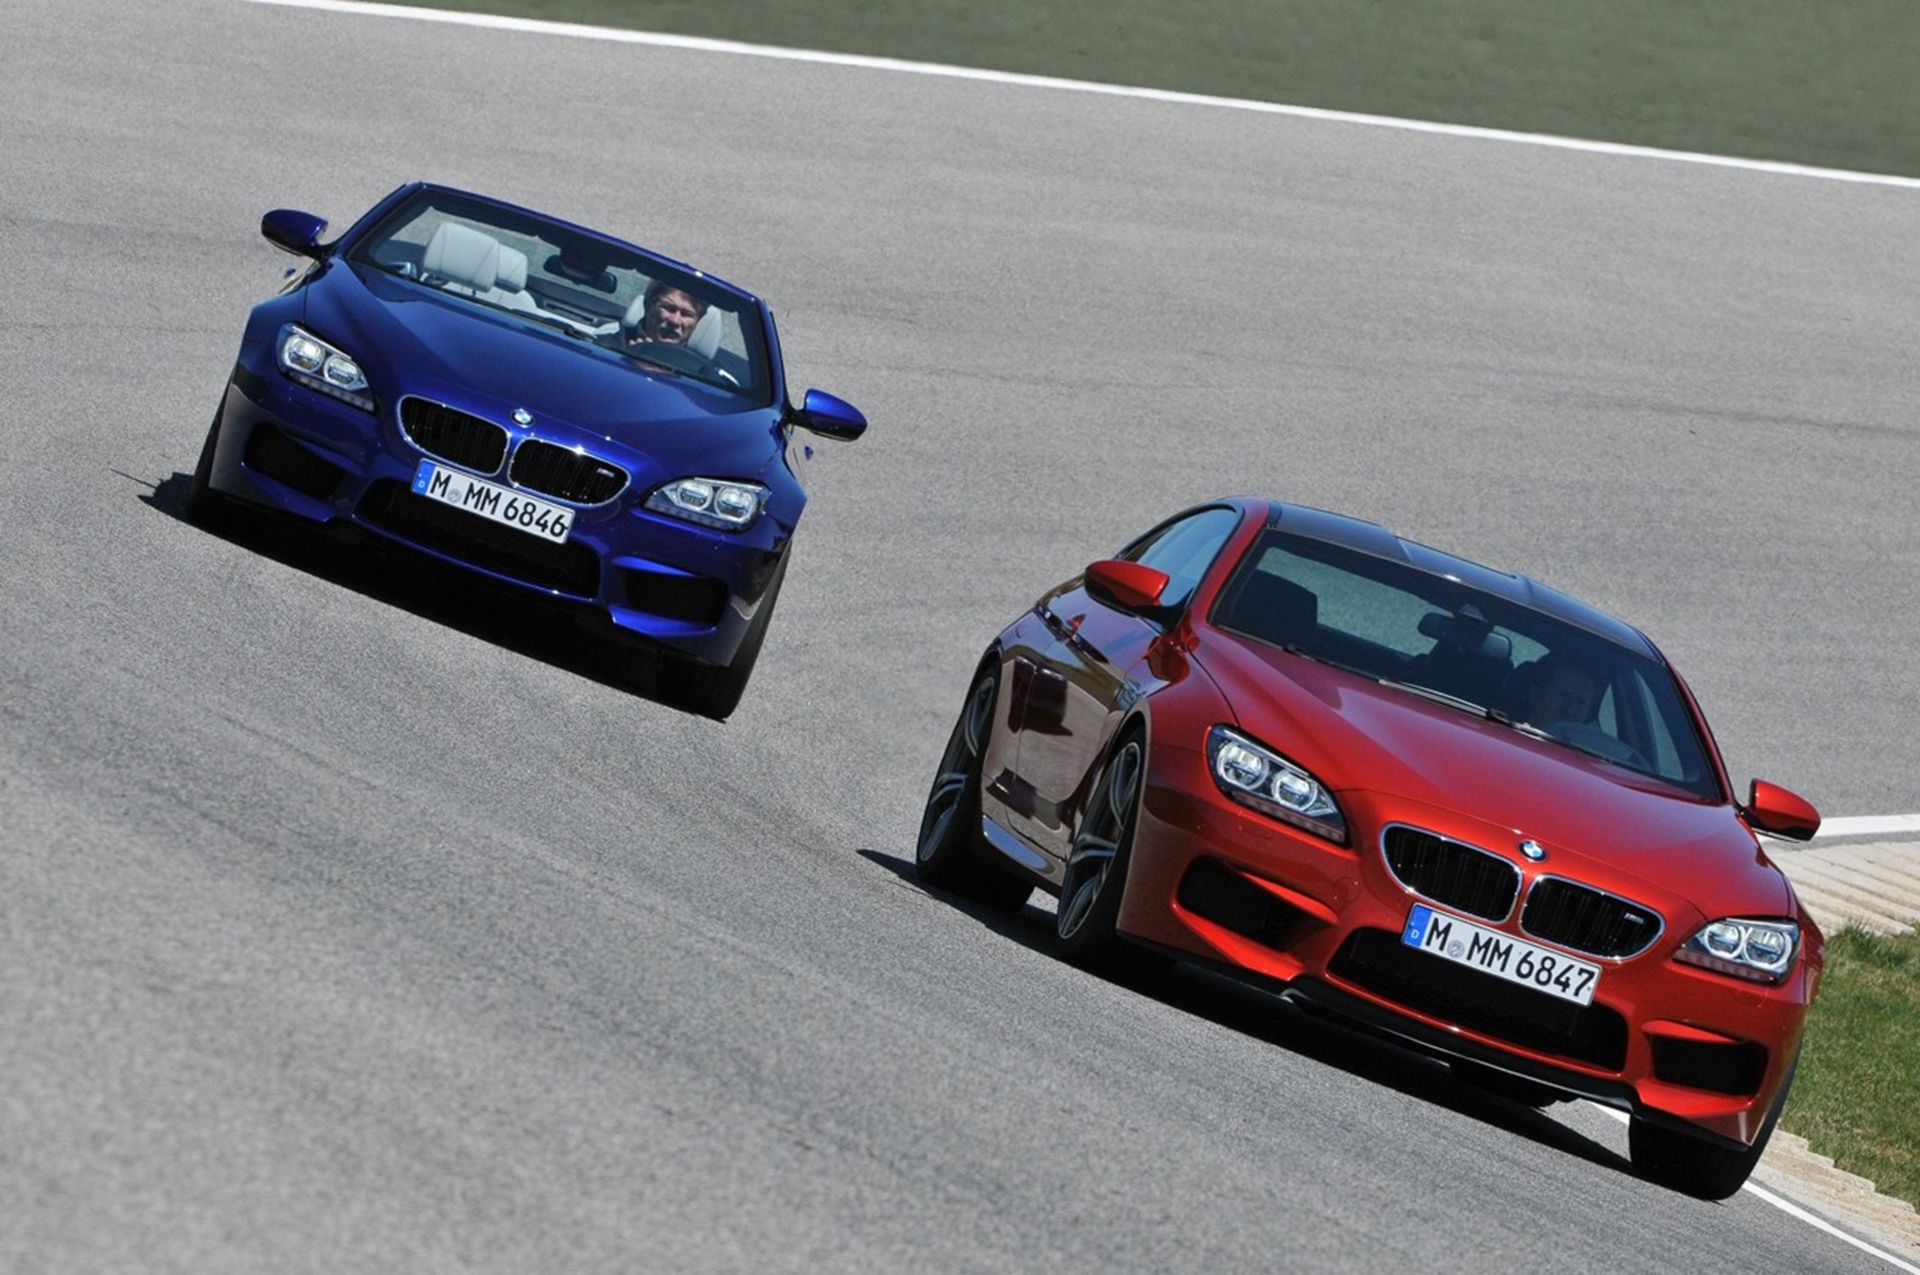 MICHELIN PILOT SUPER SPORT: HIGH-TECH TYRES FOR THE NEW BMW M6